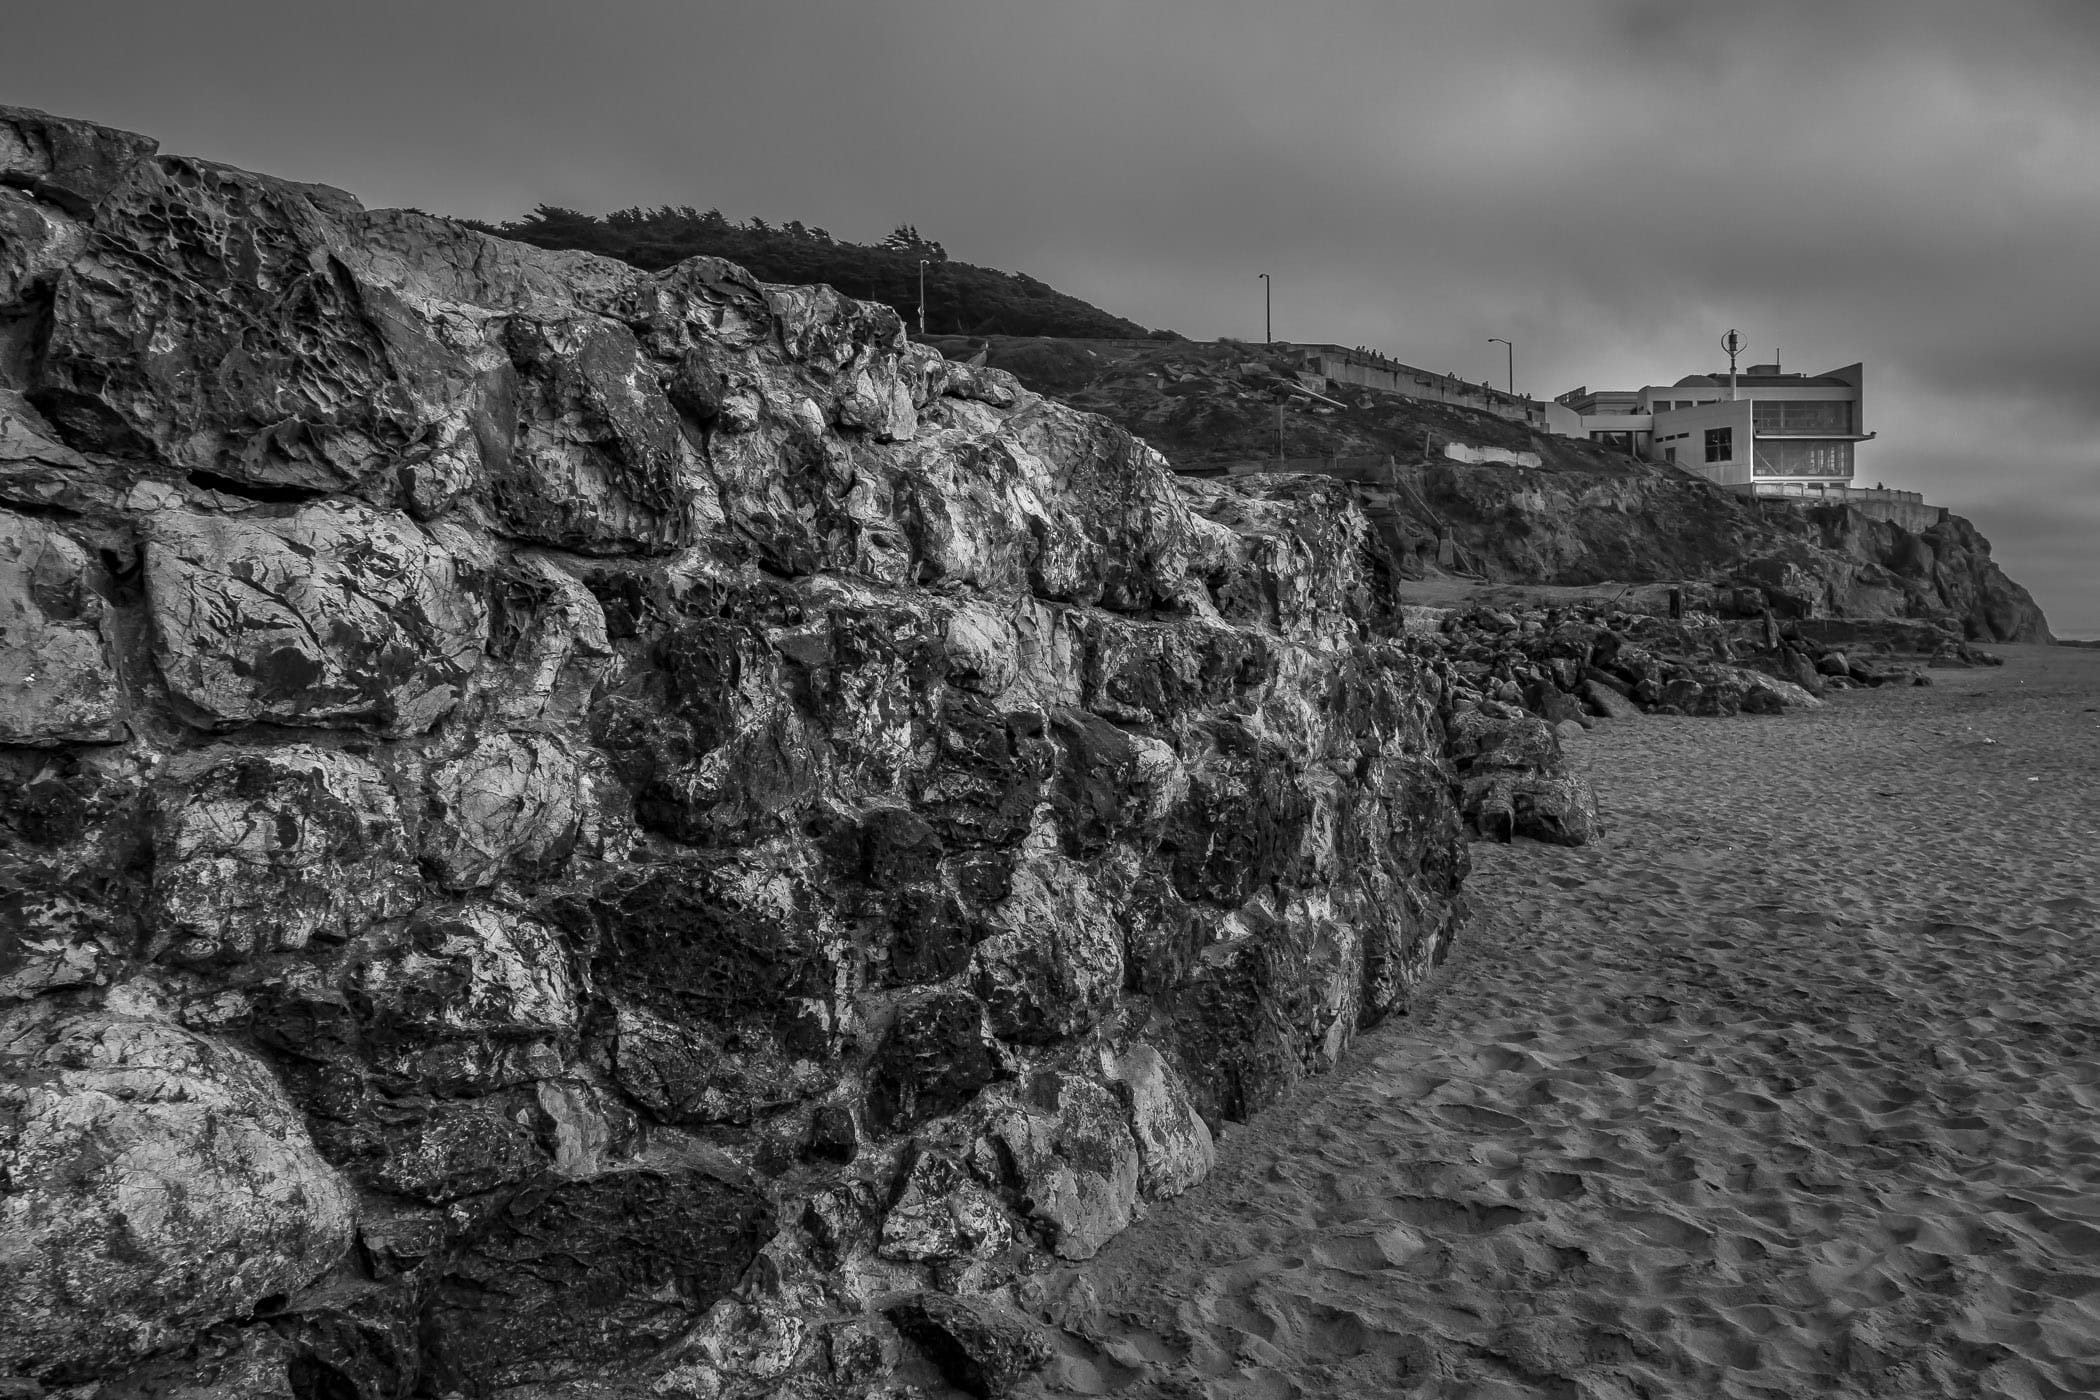 A rock wall—part of the ruins of the Sutro Baths—leads towards the modern wing of the historic Cliff House restaurant on the beach at Lands End, San Francisco.